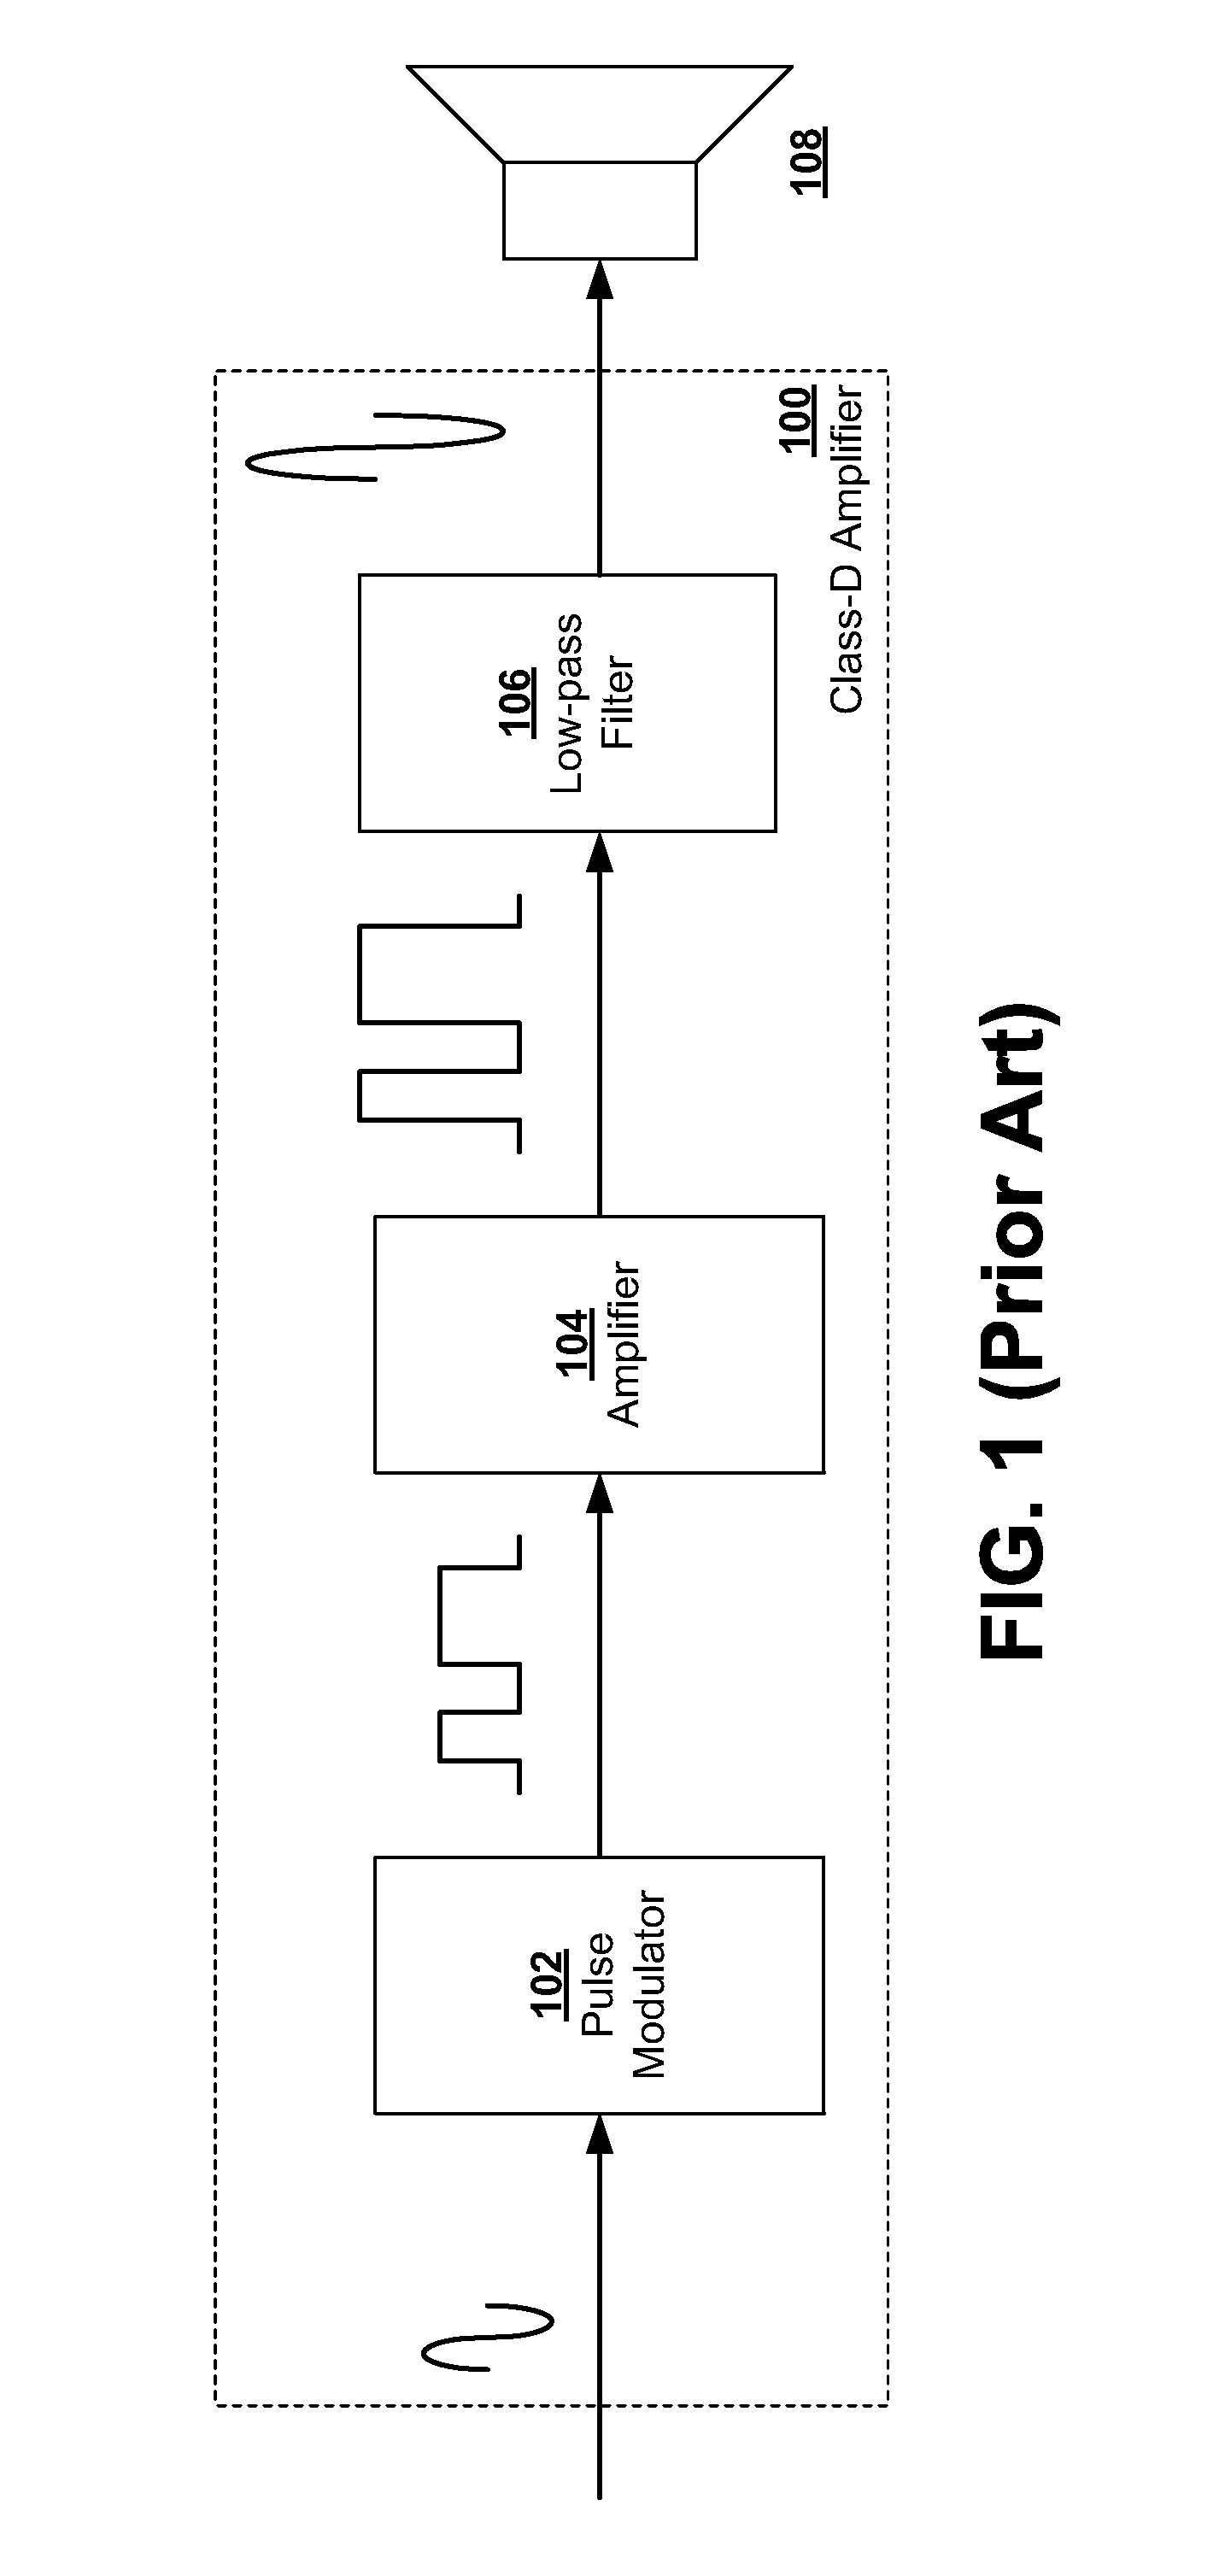 Systems and Methods for Driving High Power Stages Using Lower Voltage Processes